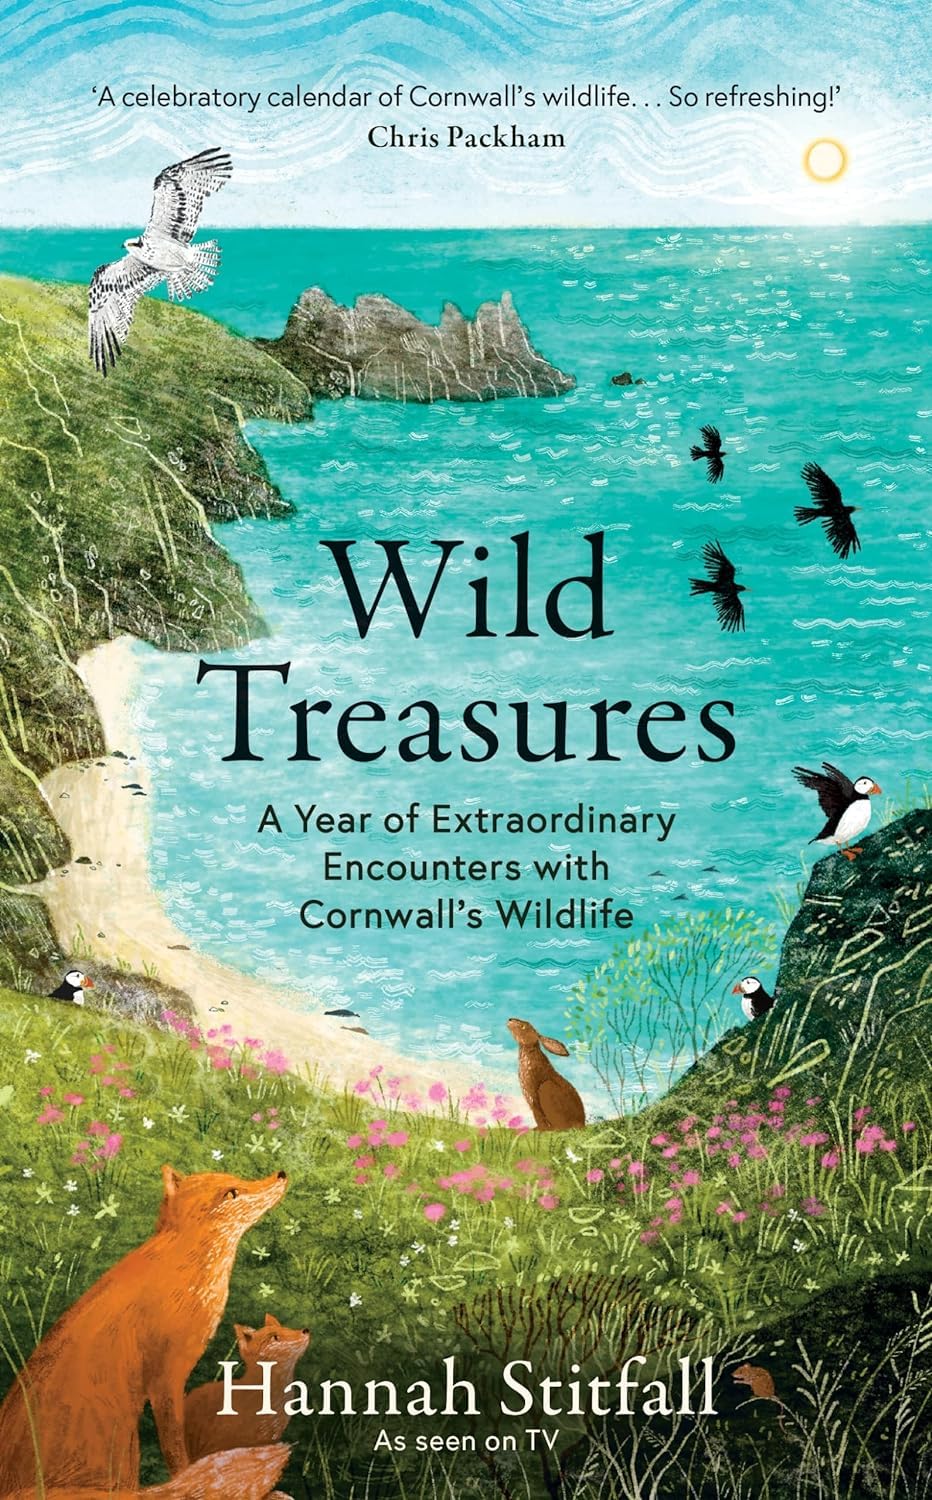 books on what we can learn from wildlife